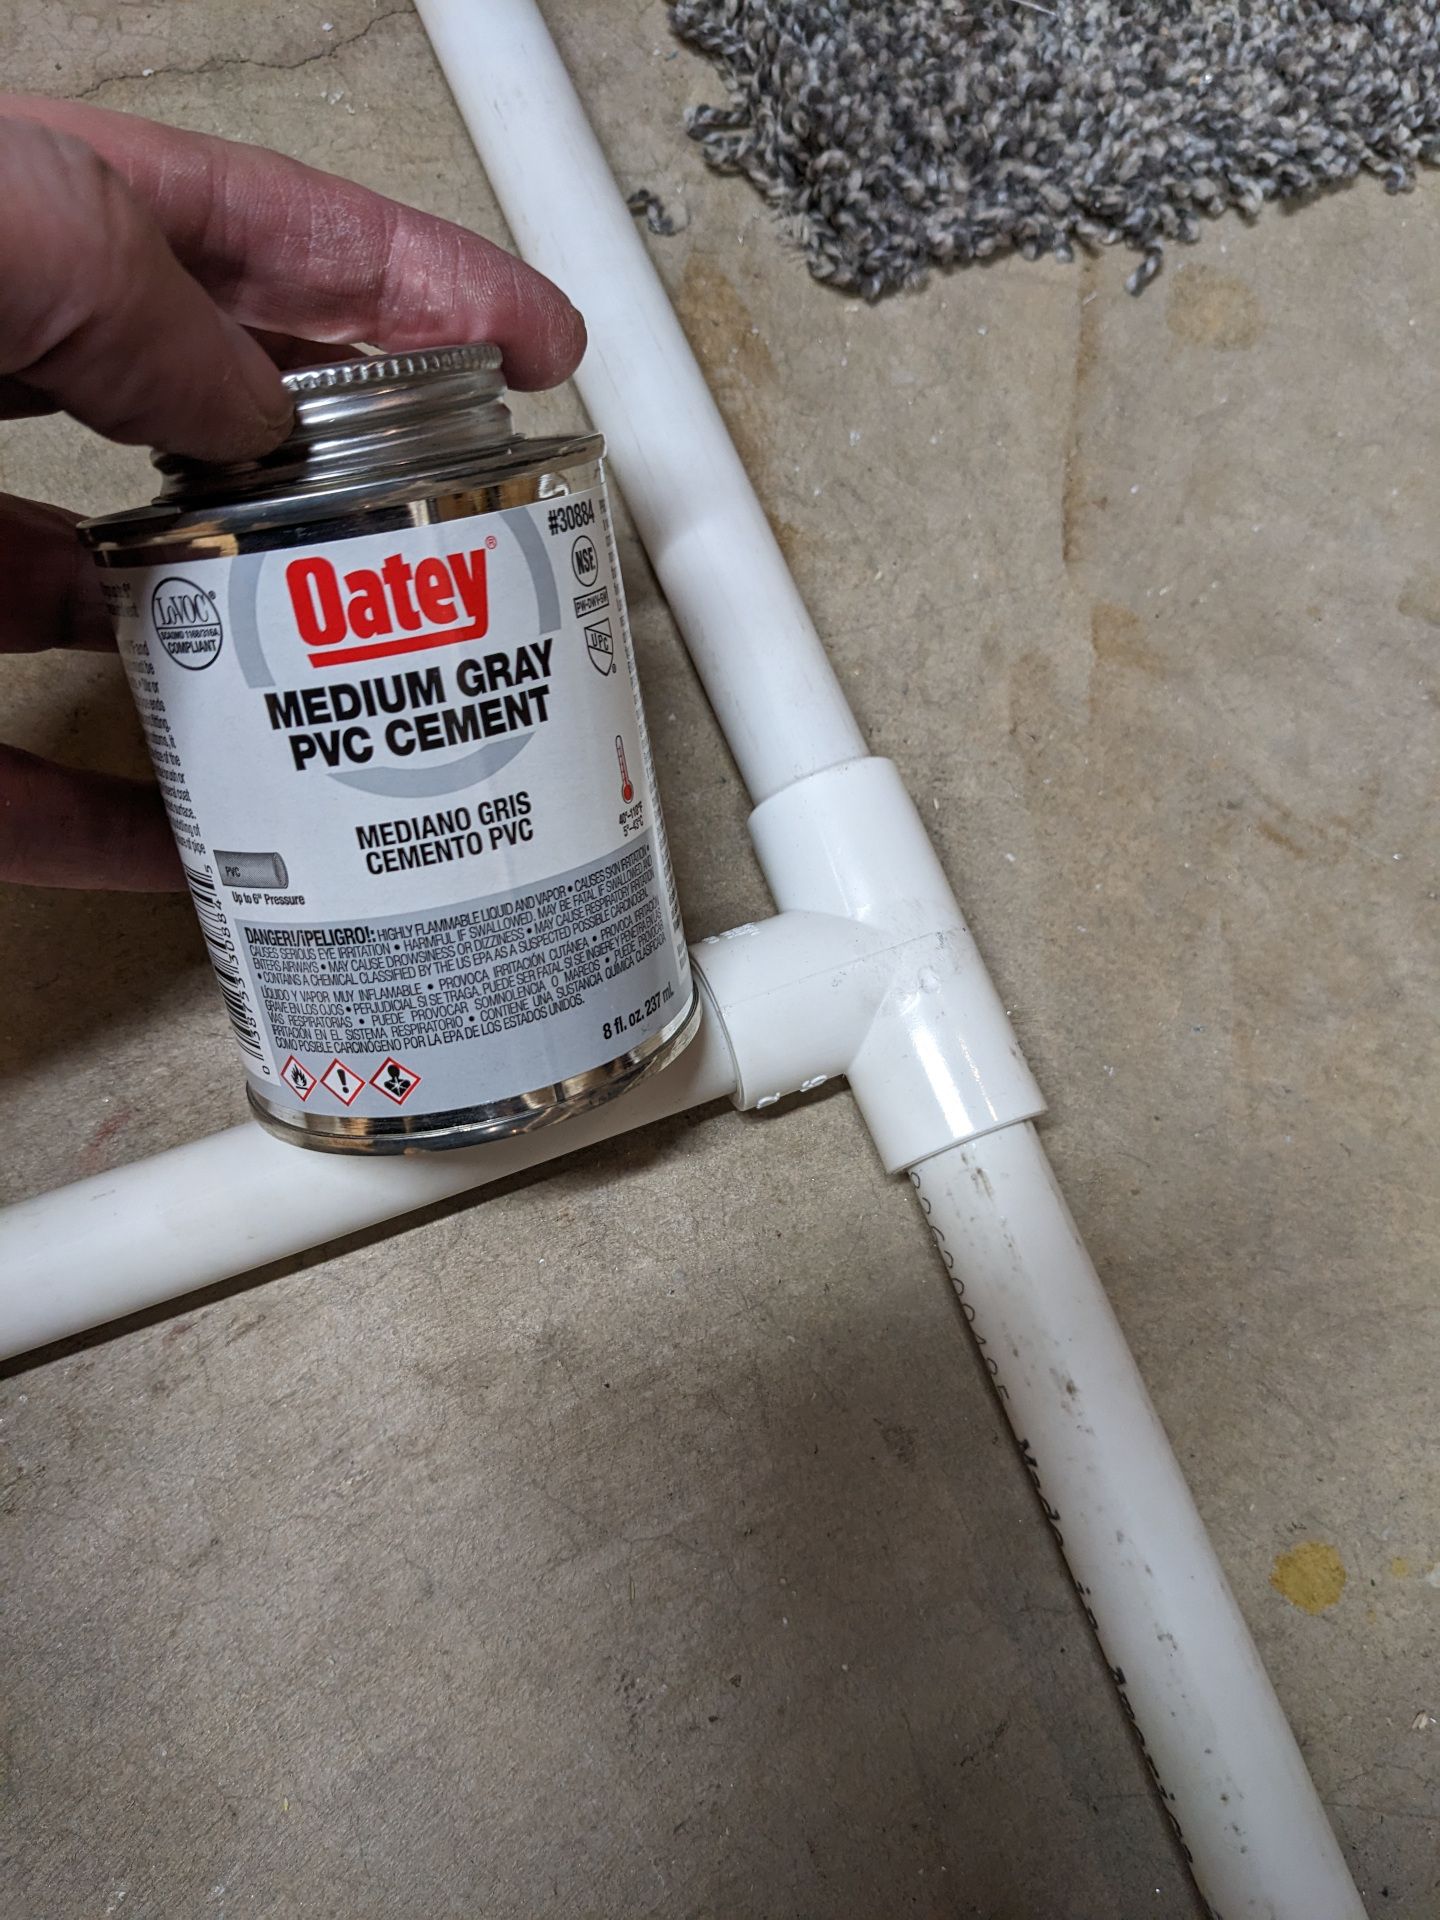 PVC cement next to some PVC pipe